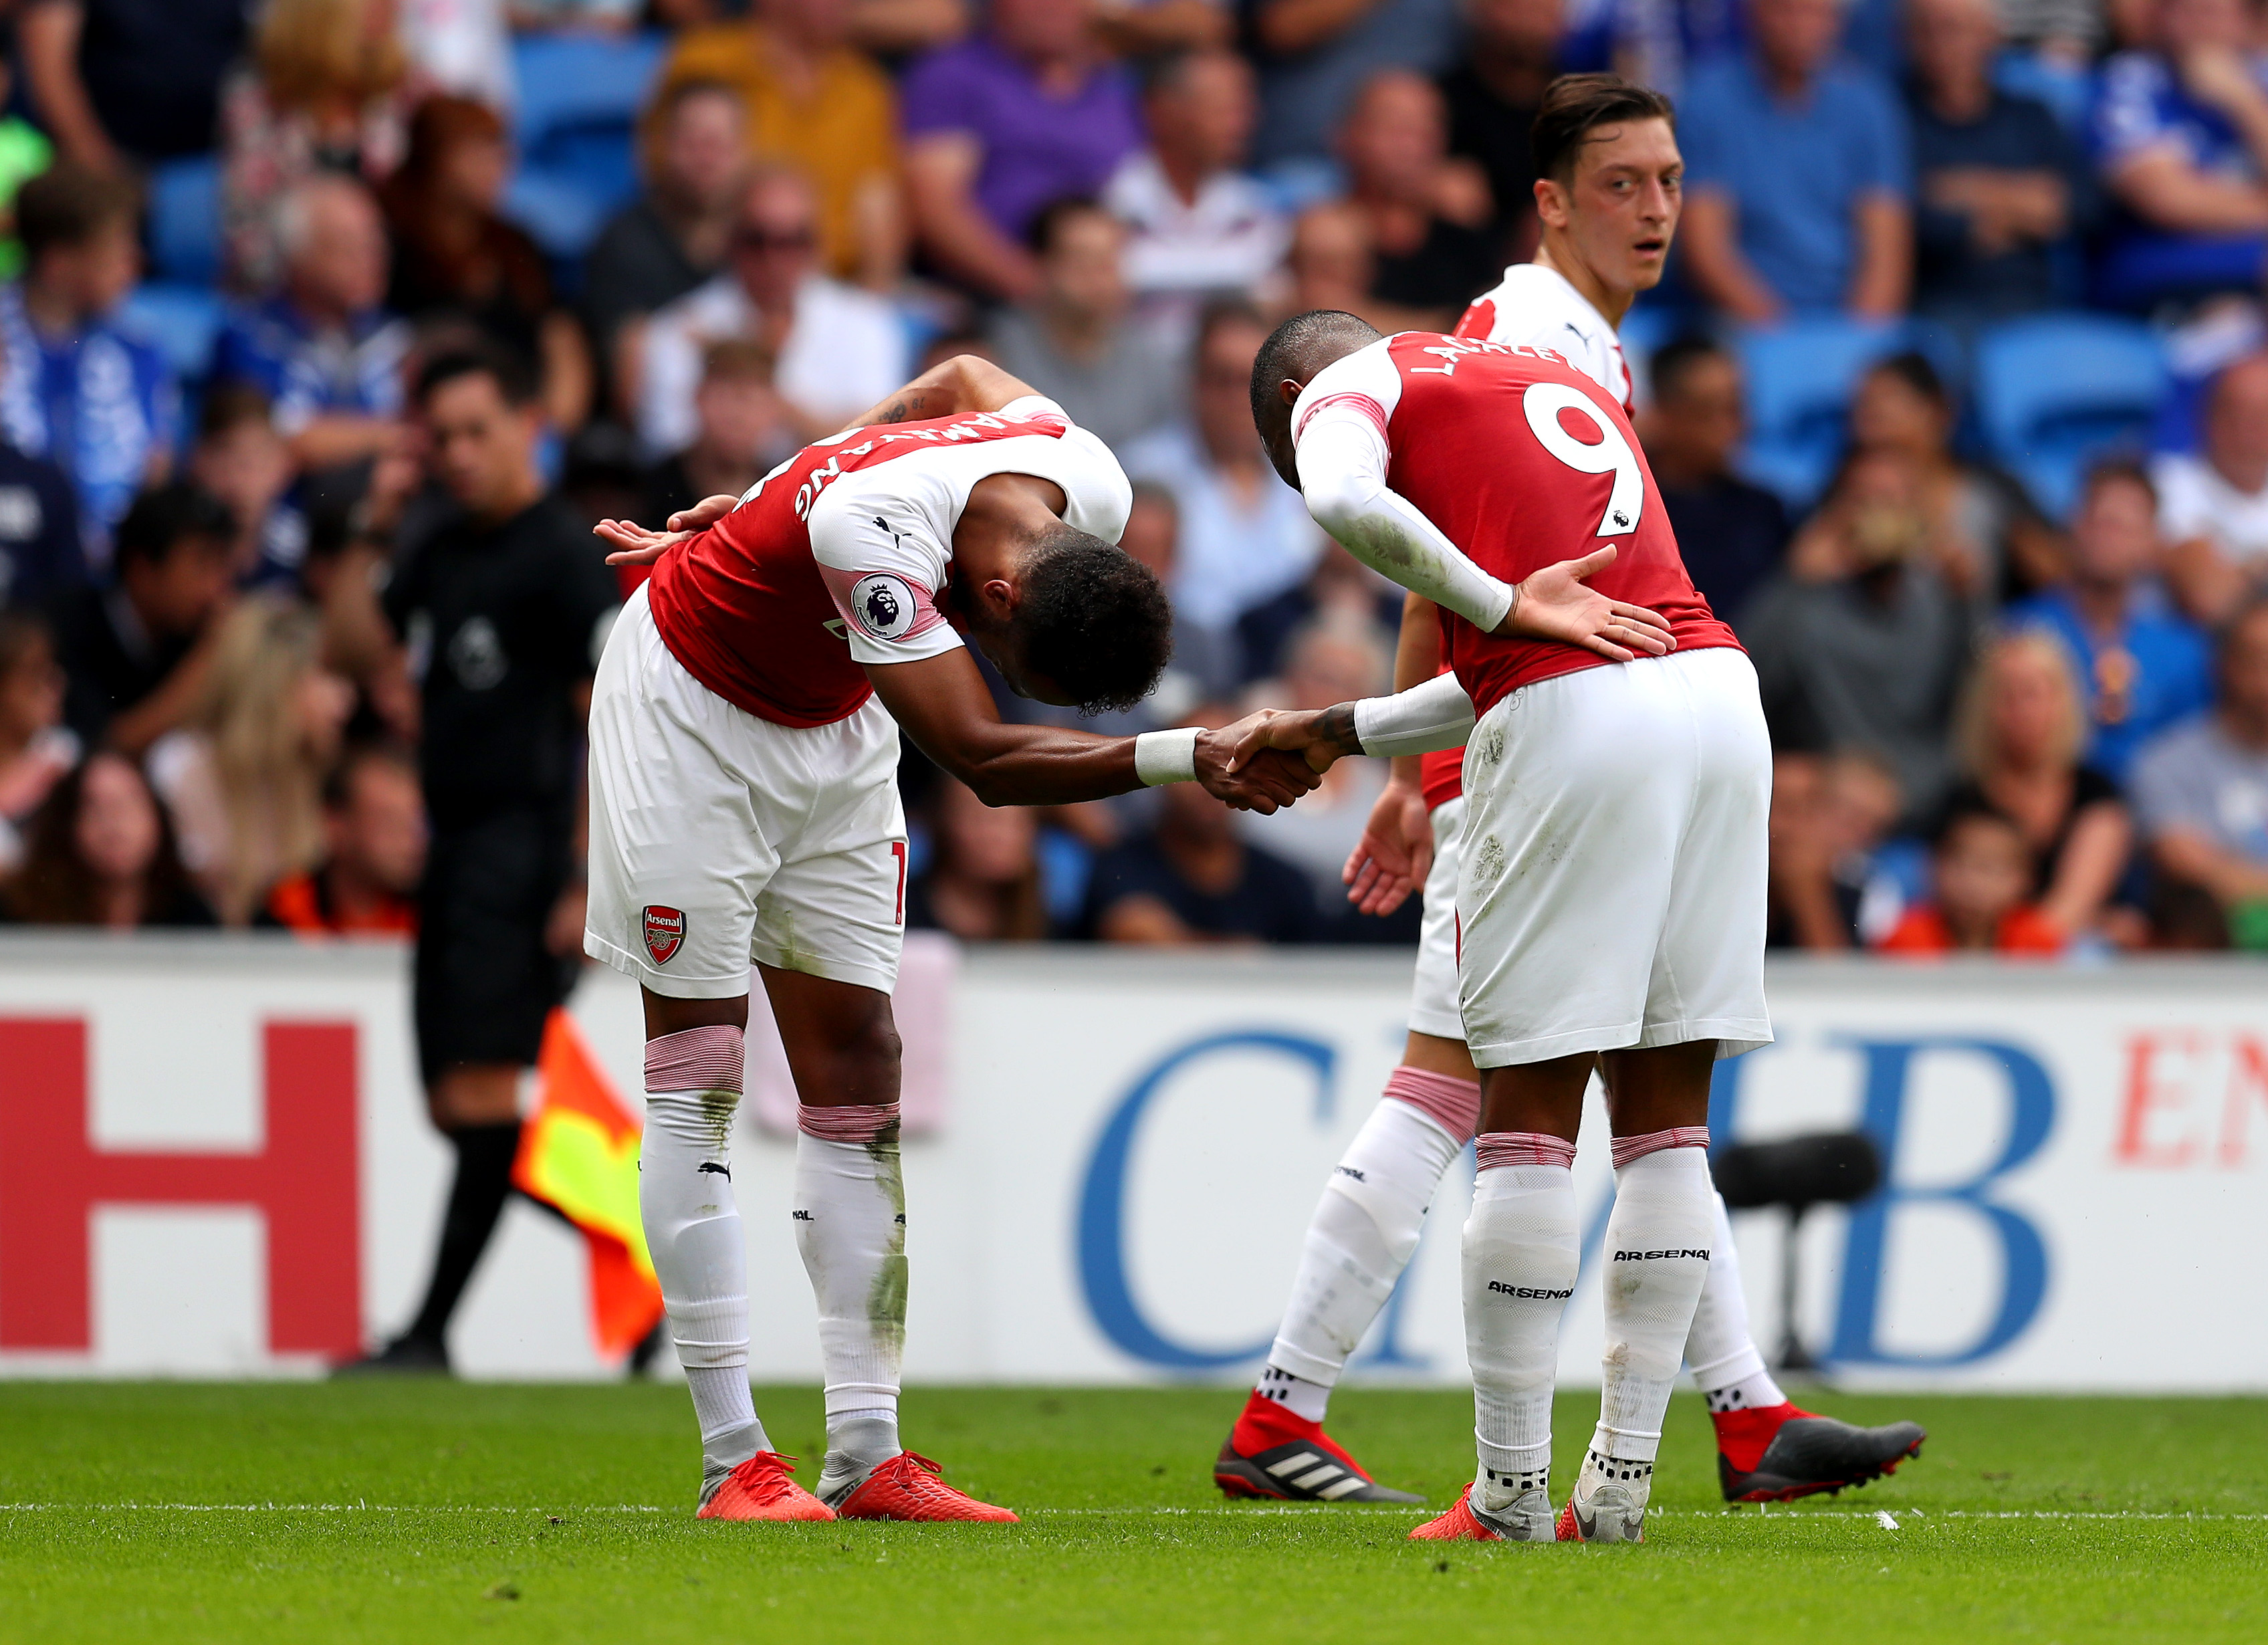 CARDIFF, WALES - SEPTEMBER 02:  Alexandre Lacazette of Arsenal (9) celebrates with Pierre-Emerick Aubameyang as he scores his team's third goal during the Premier League match between Cardiff City and Arsenal FC at Cardiff City Stadium on September 2, 2018 in Cardiff, United Kingdom.  (Photo by Catherine Ivill/Getty Images)